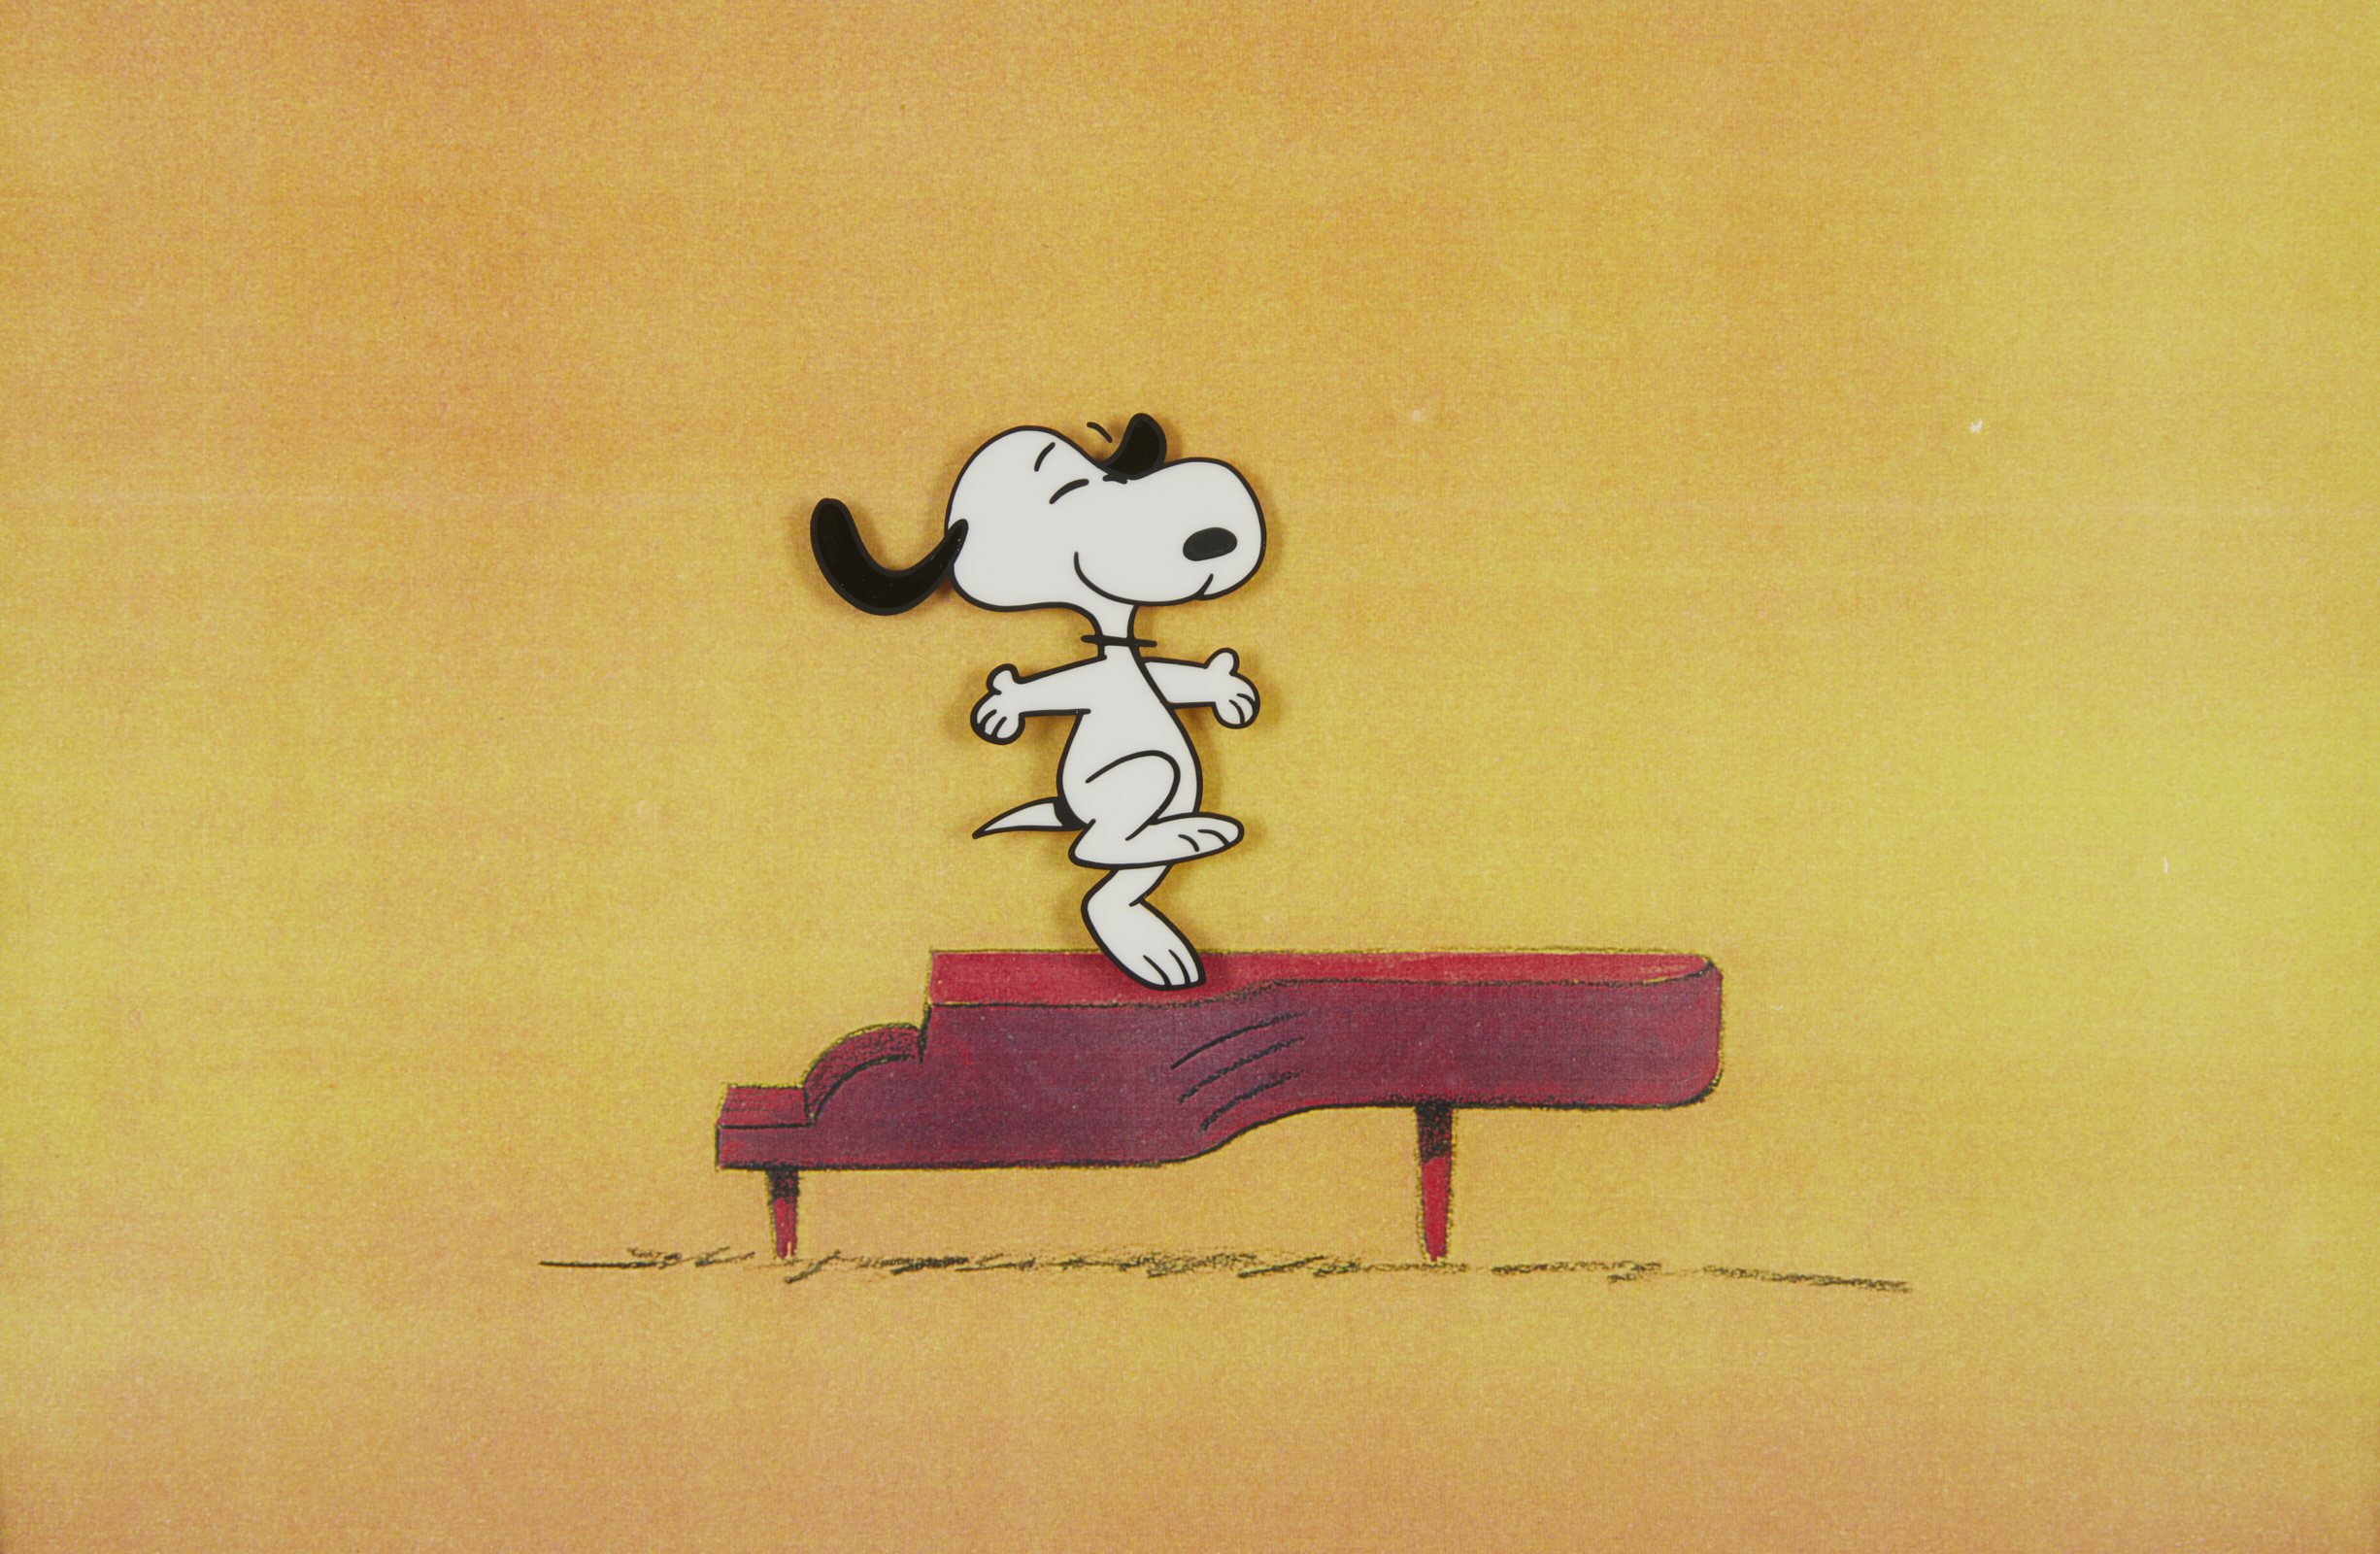 1970s Peanuts Animation Cel of Snoopy